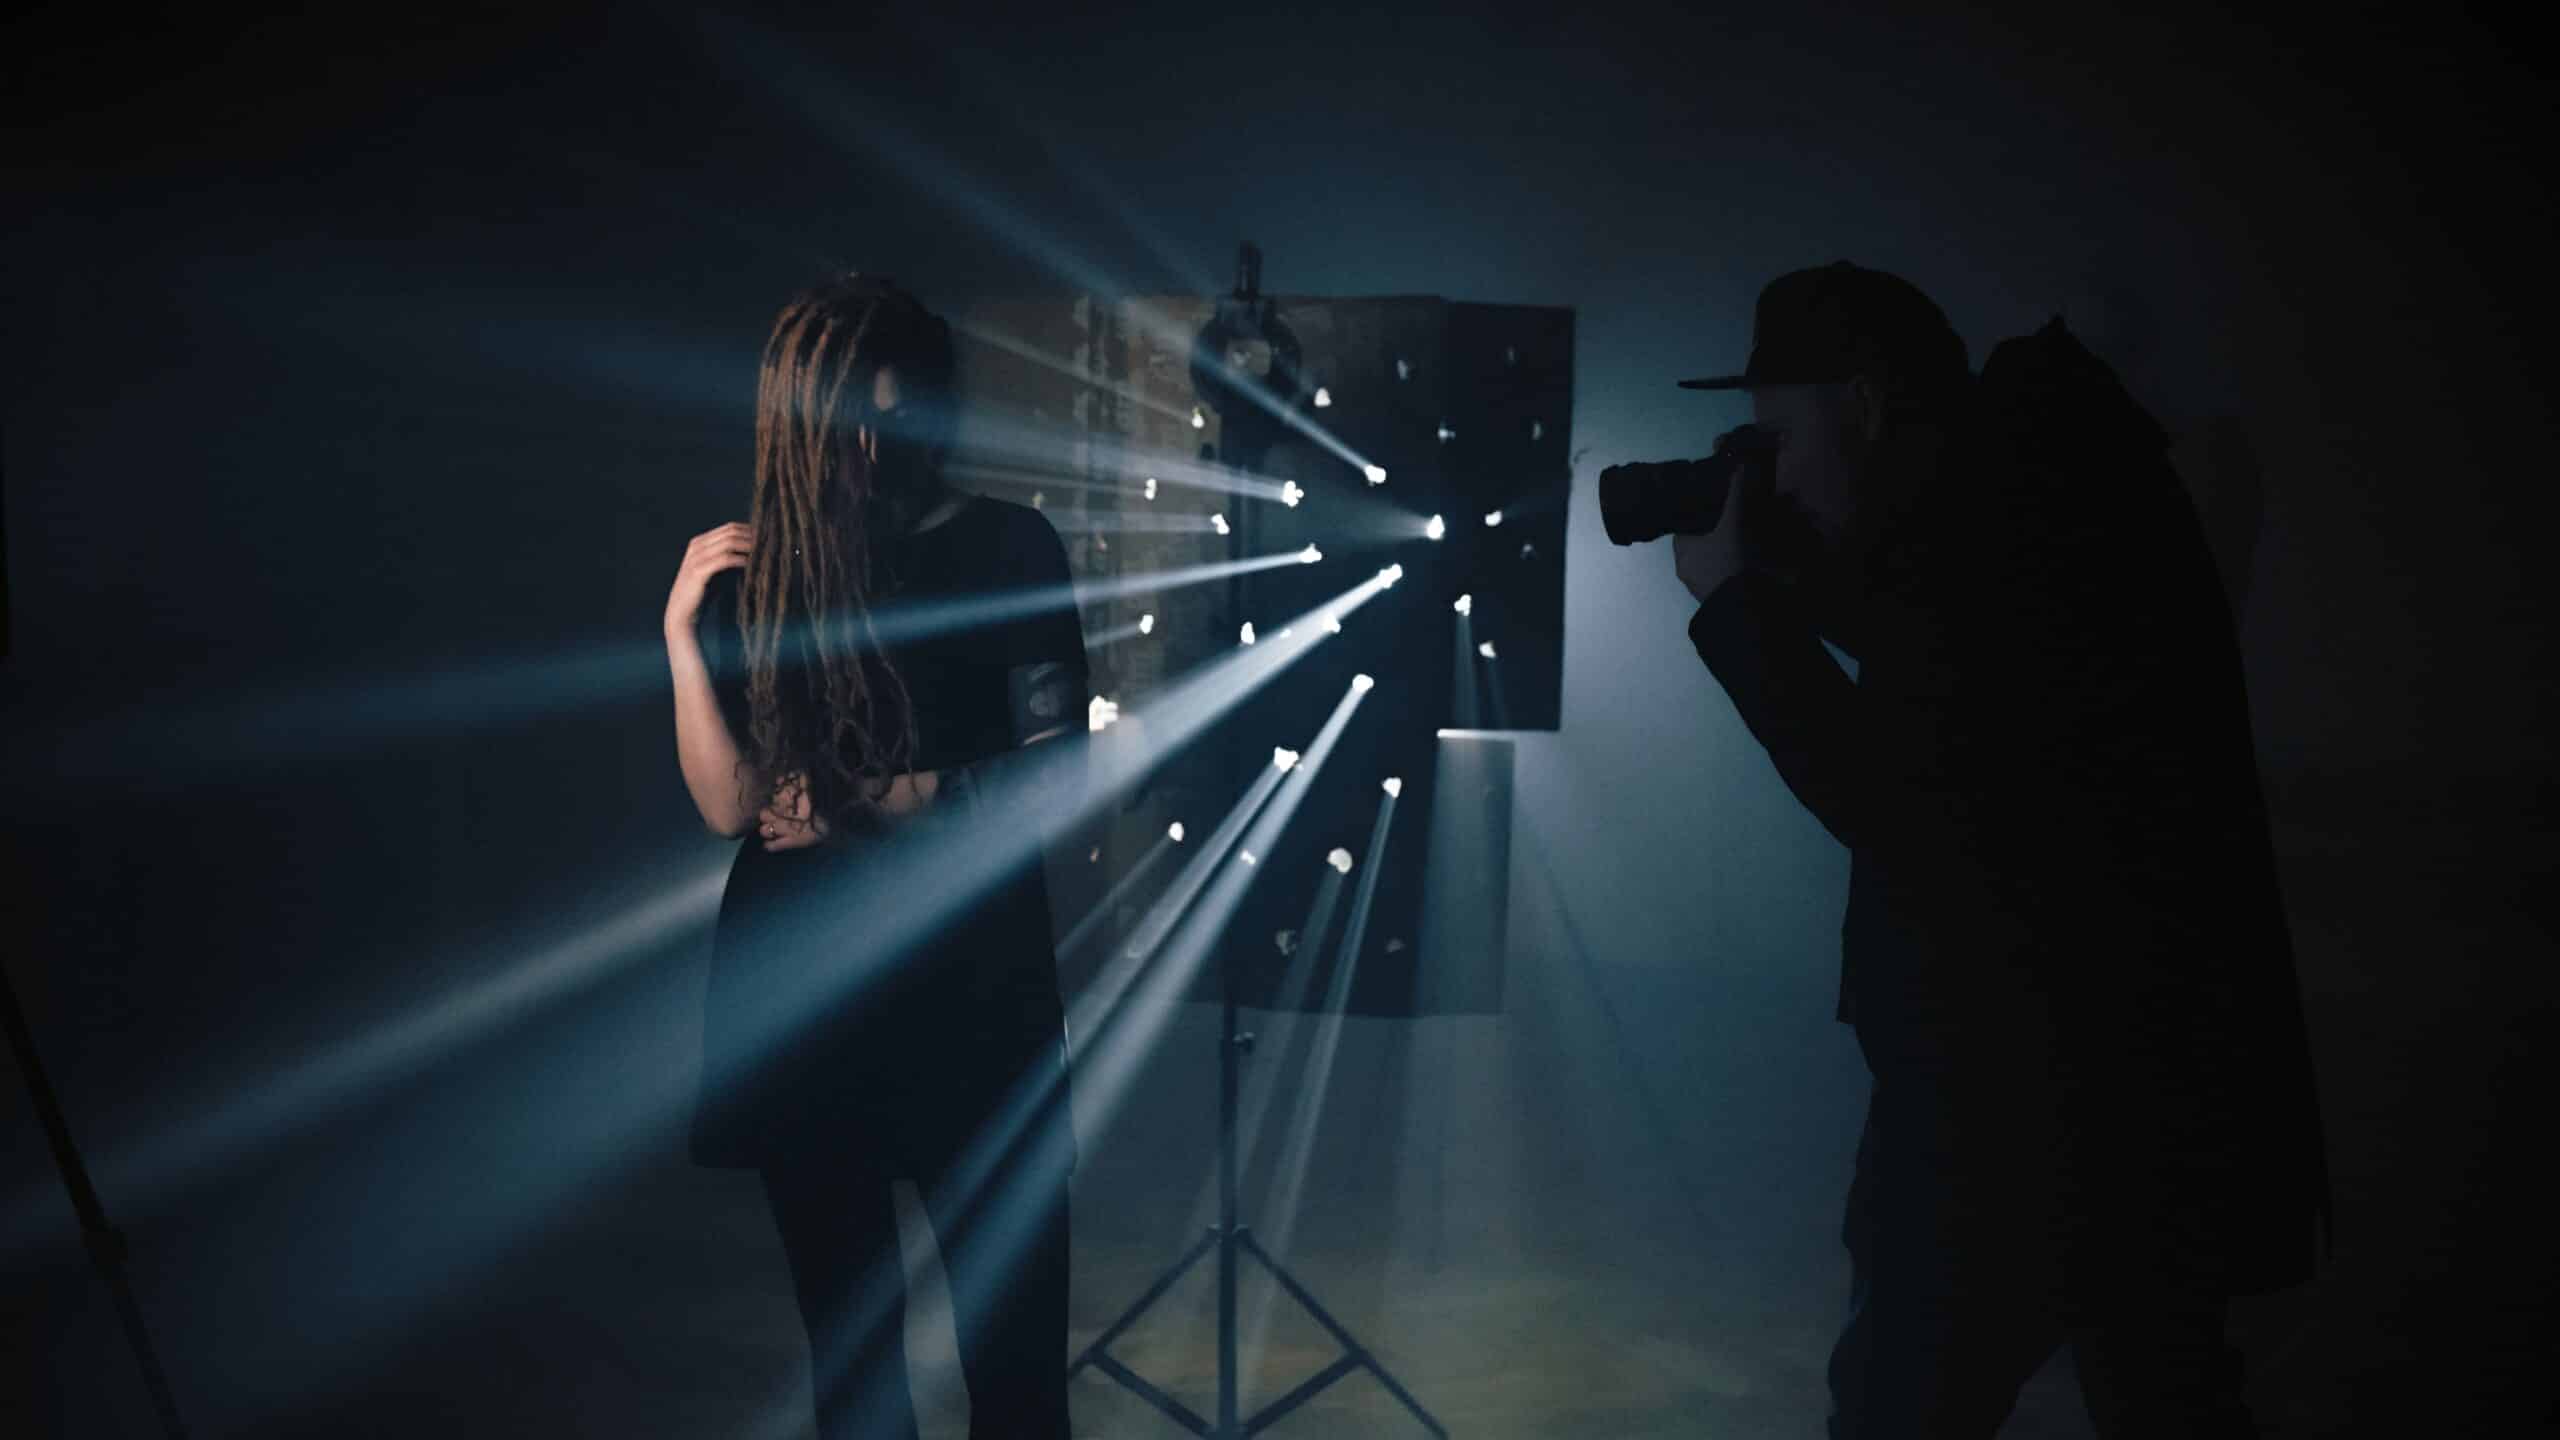 Effective light rays: how to easily create and use them in your photography